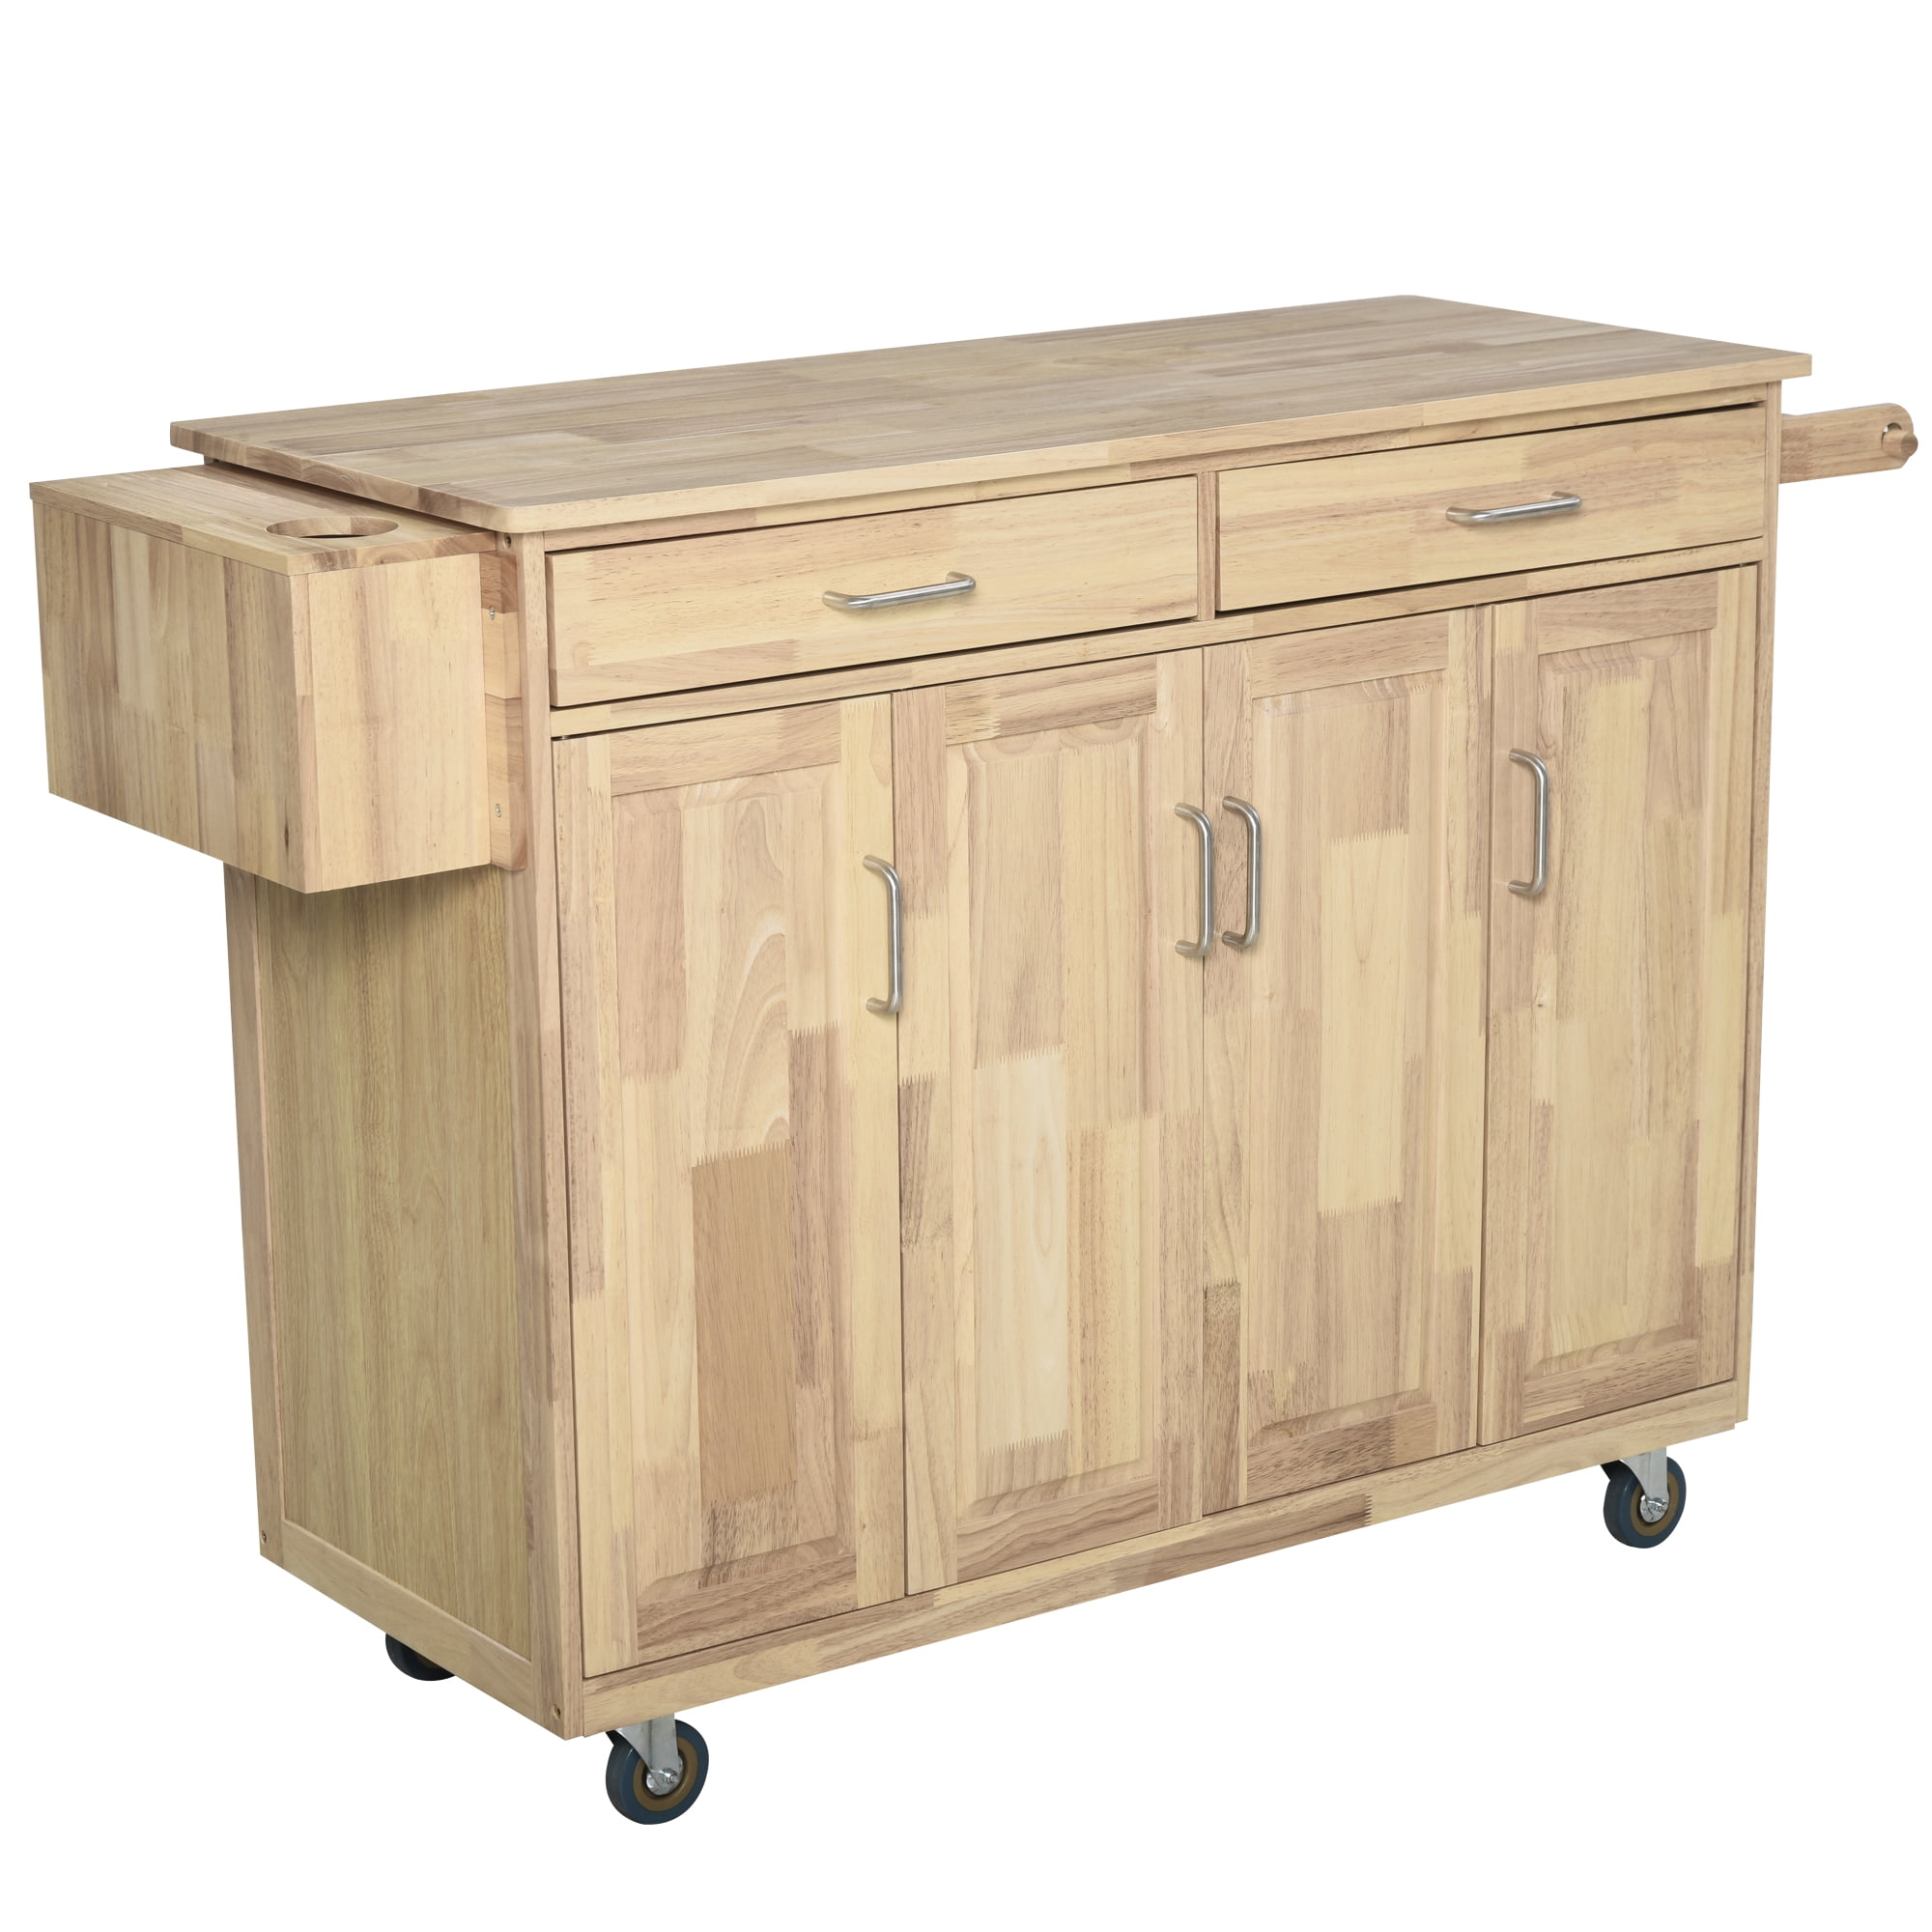 HOMCOM Wooden Rolling Kitchen Island Utility Storage Cart with Drawers